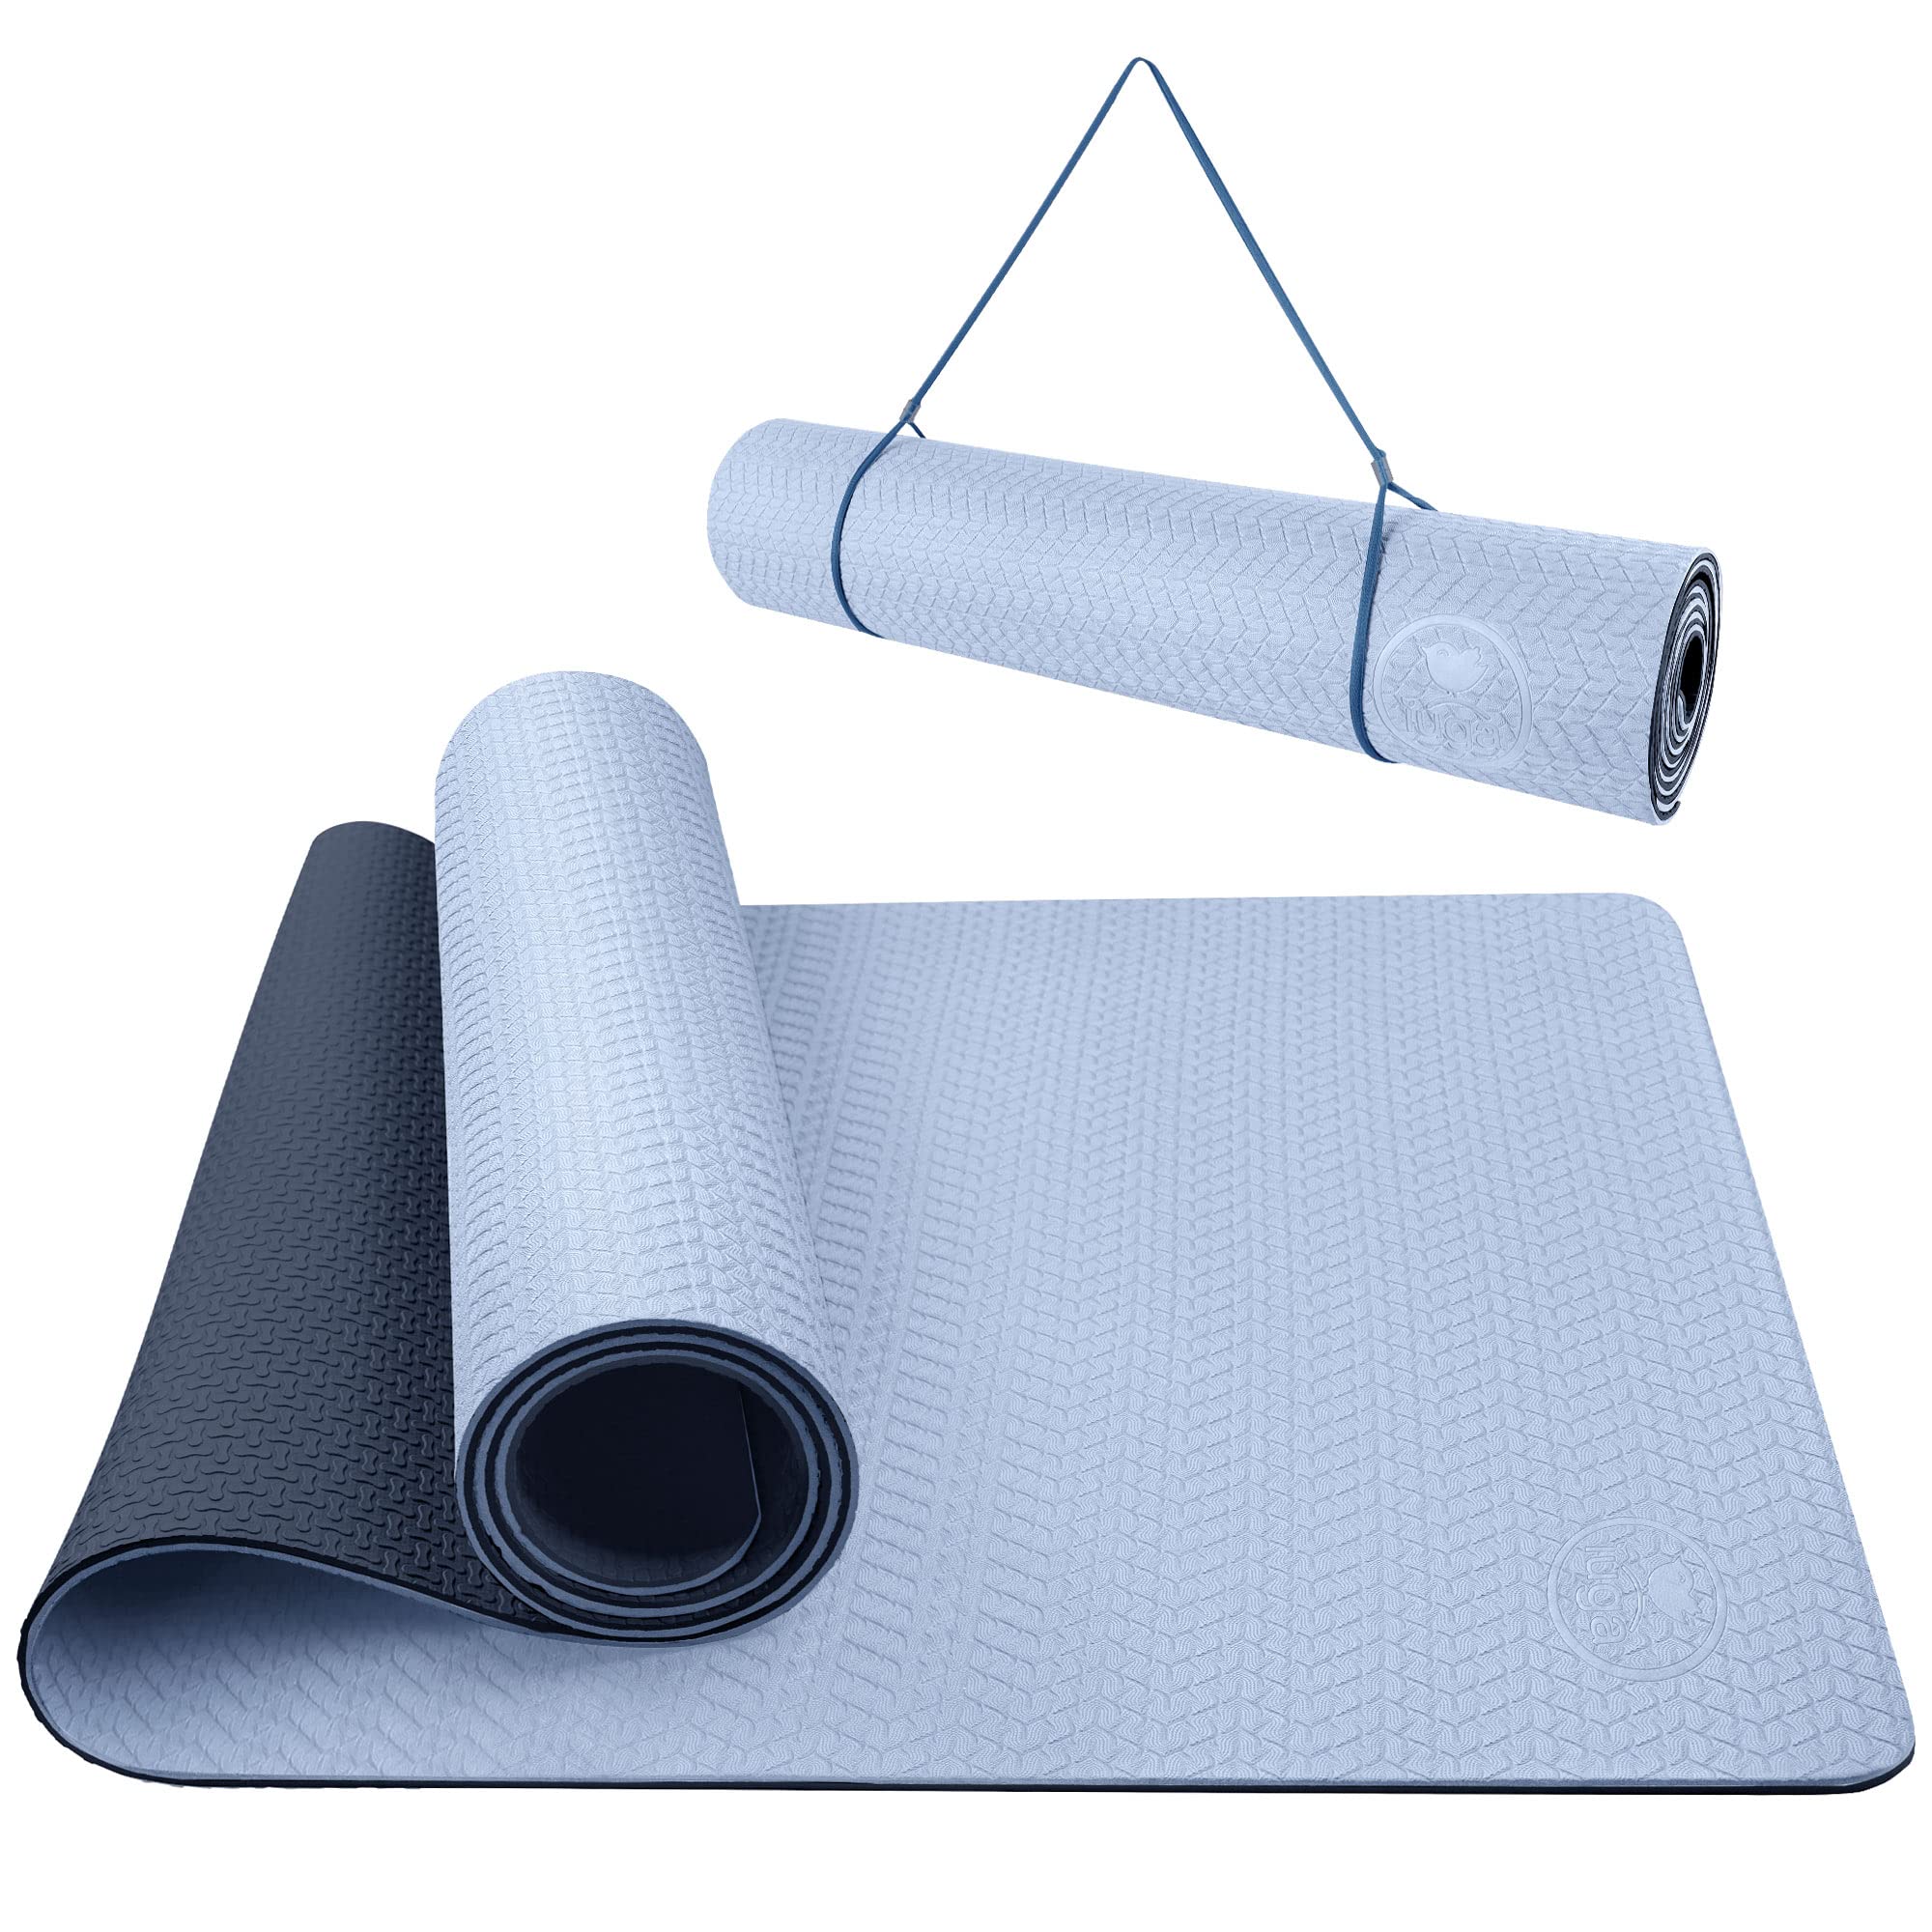 Foldable Yoga Mat / Beach Mat with Carry Bag, 72 X 30 Inch, Model